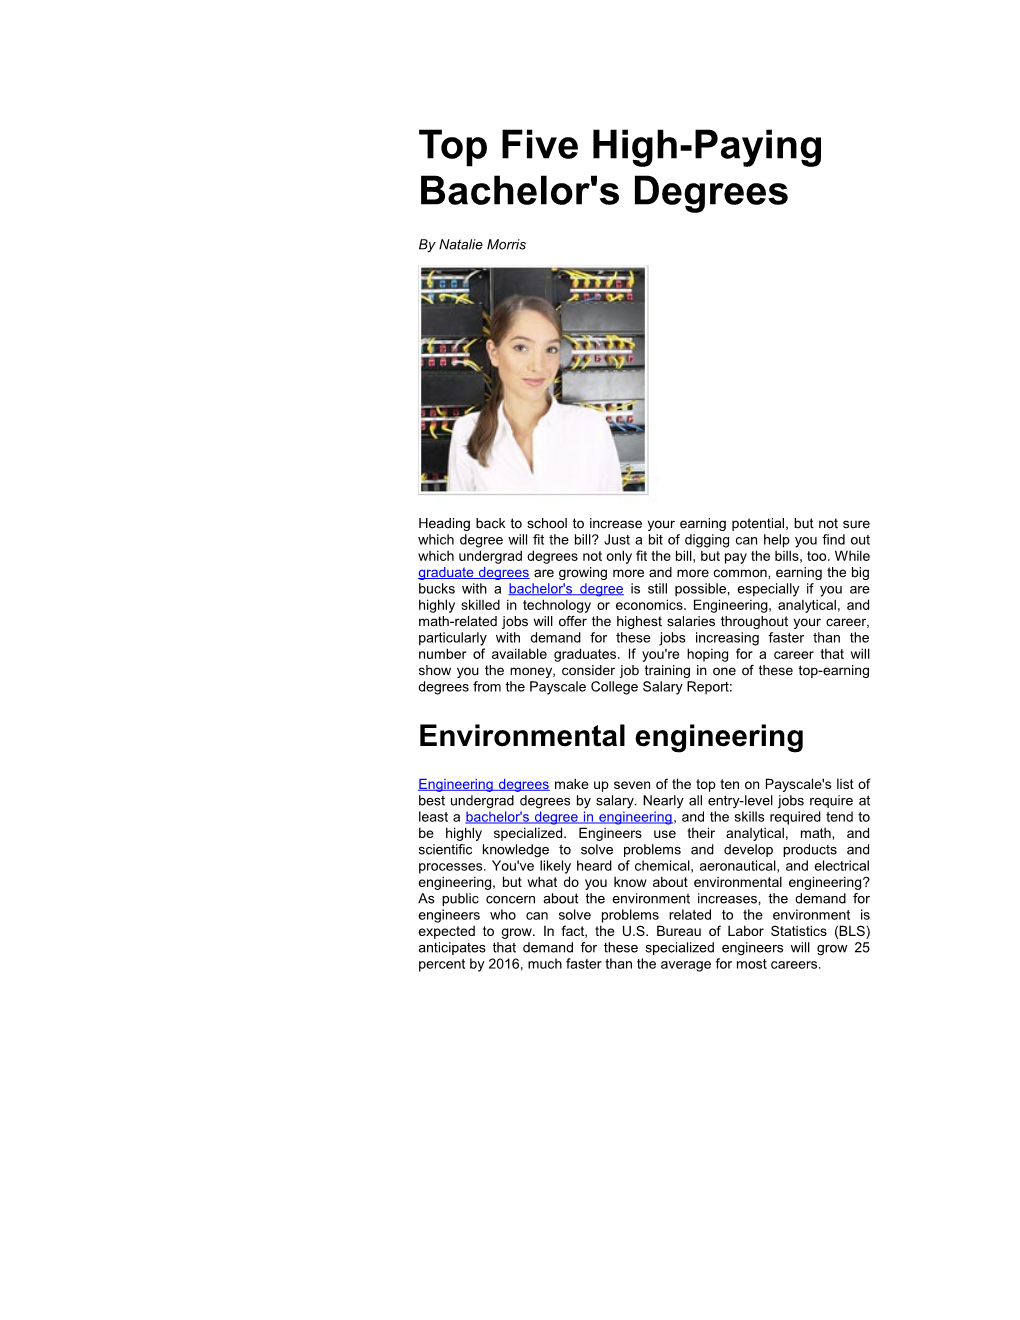 Top Five High-Paying Bachelor's Degrees